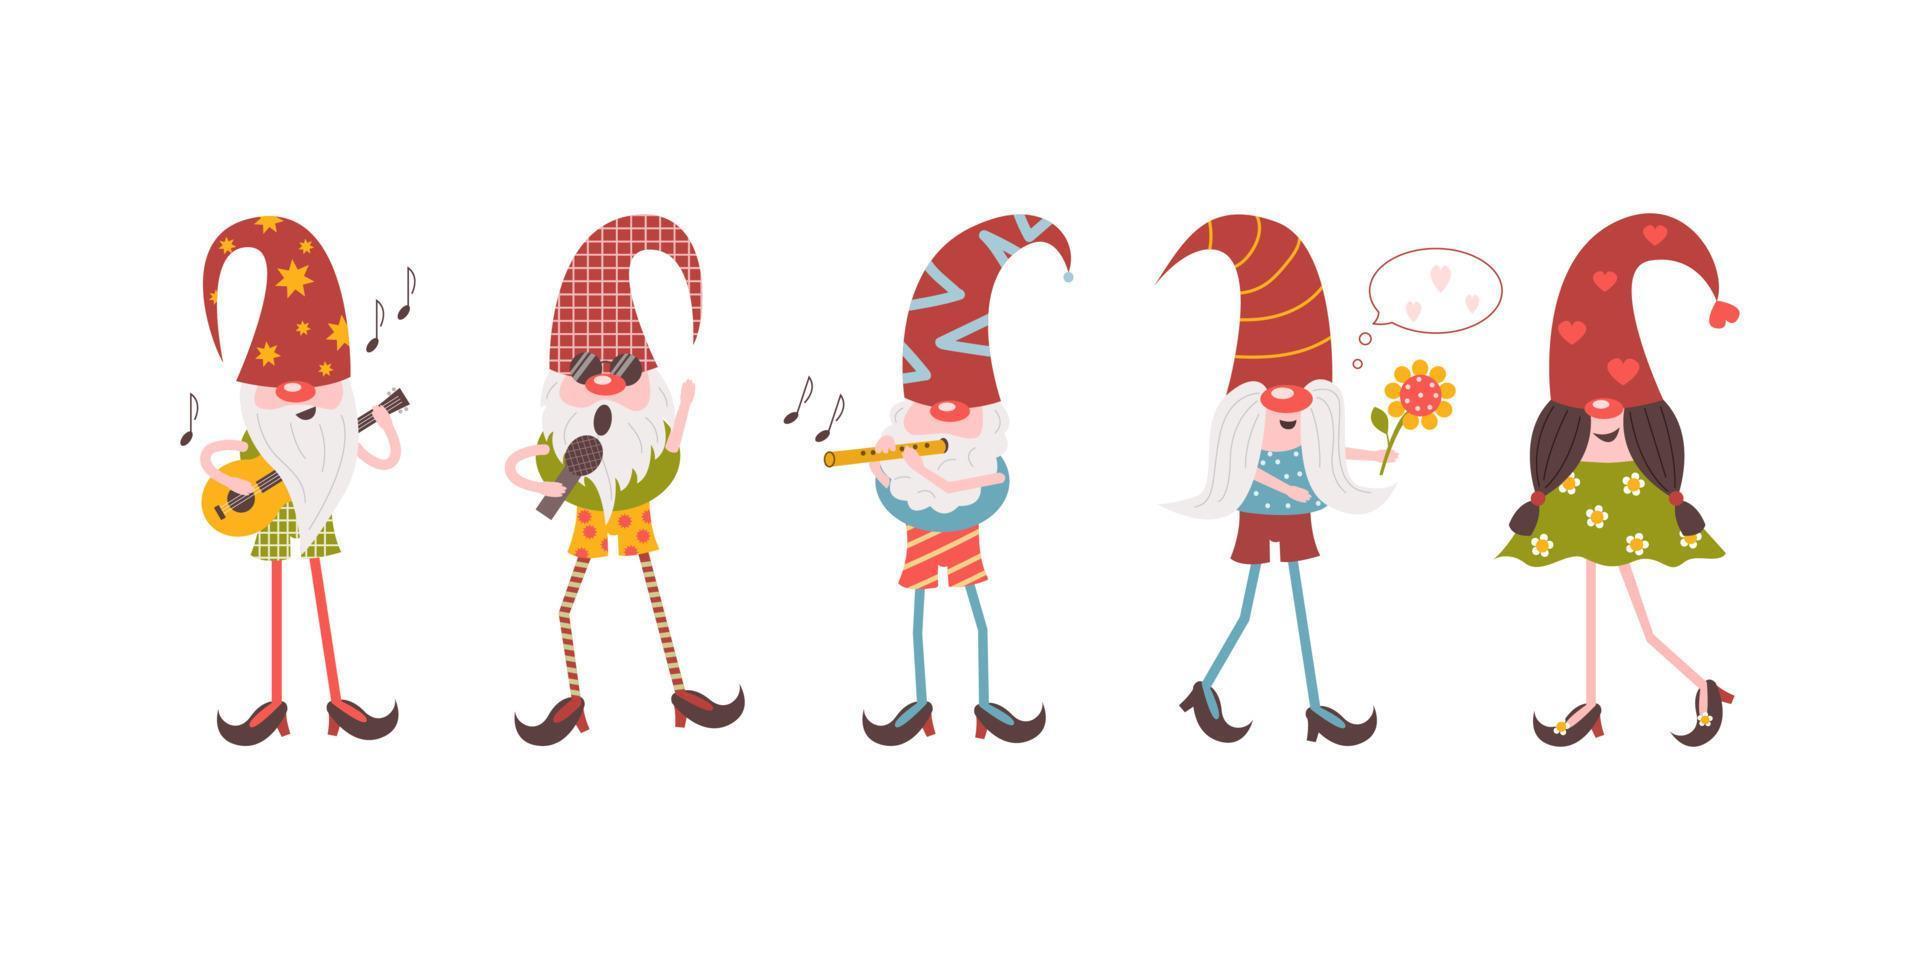 Musical group of bearded gnomes and a couple of characters in love. Set of Cartoon Elves with Musical Instruments. Cute fairytale vector illustration